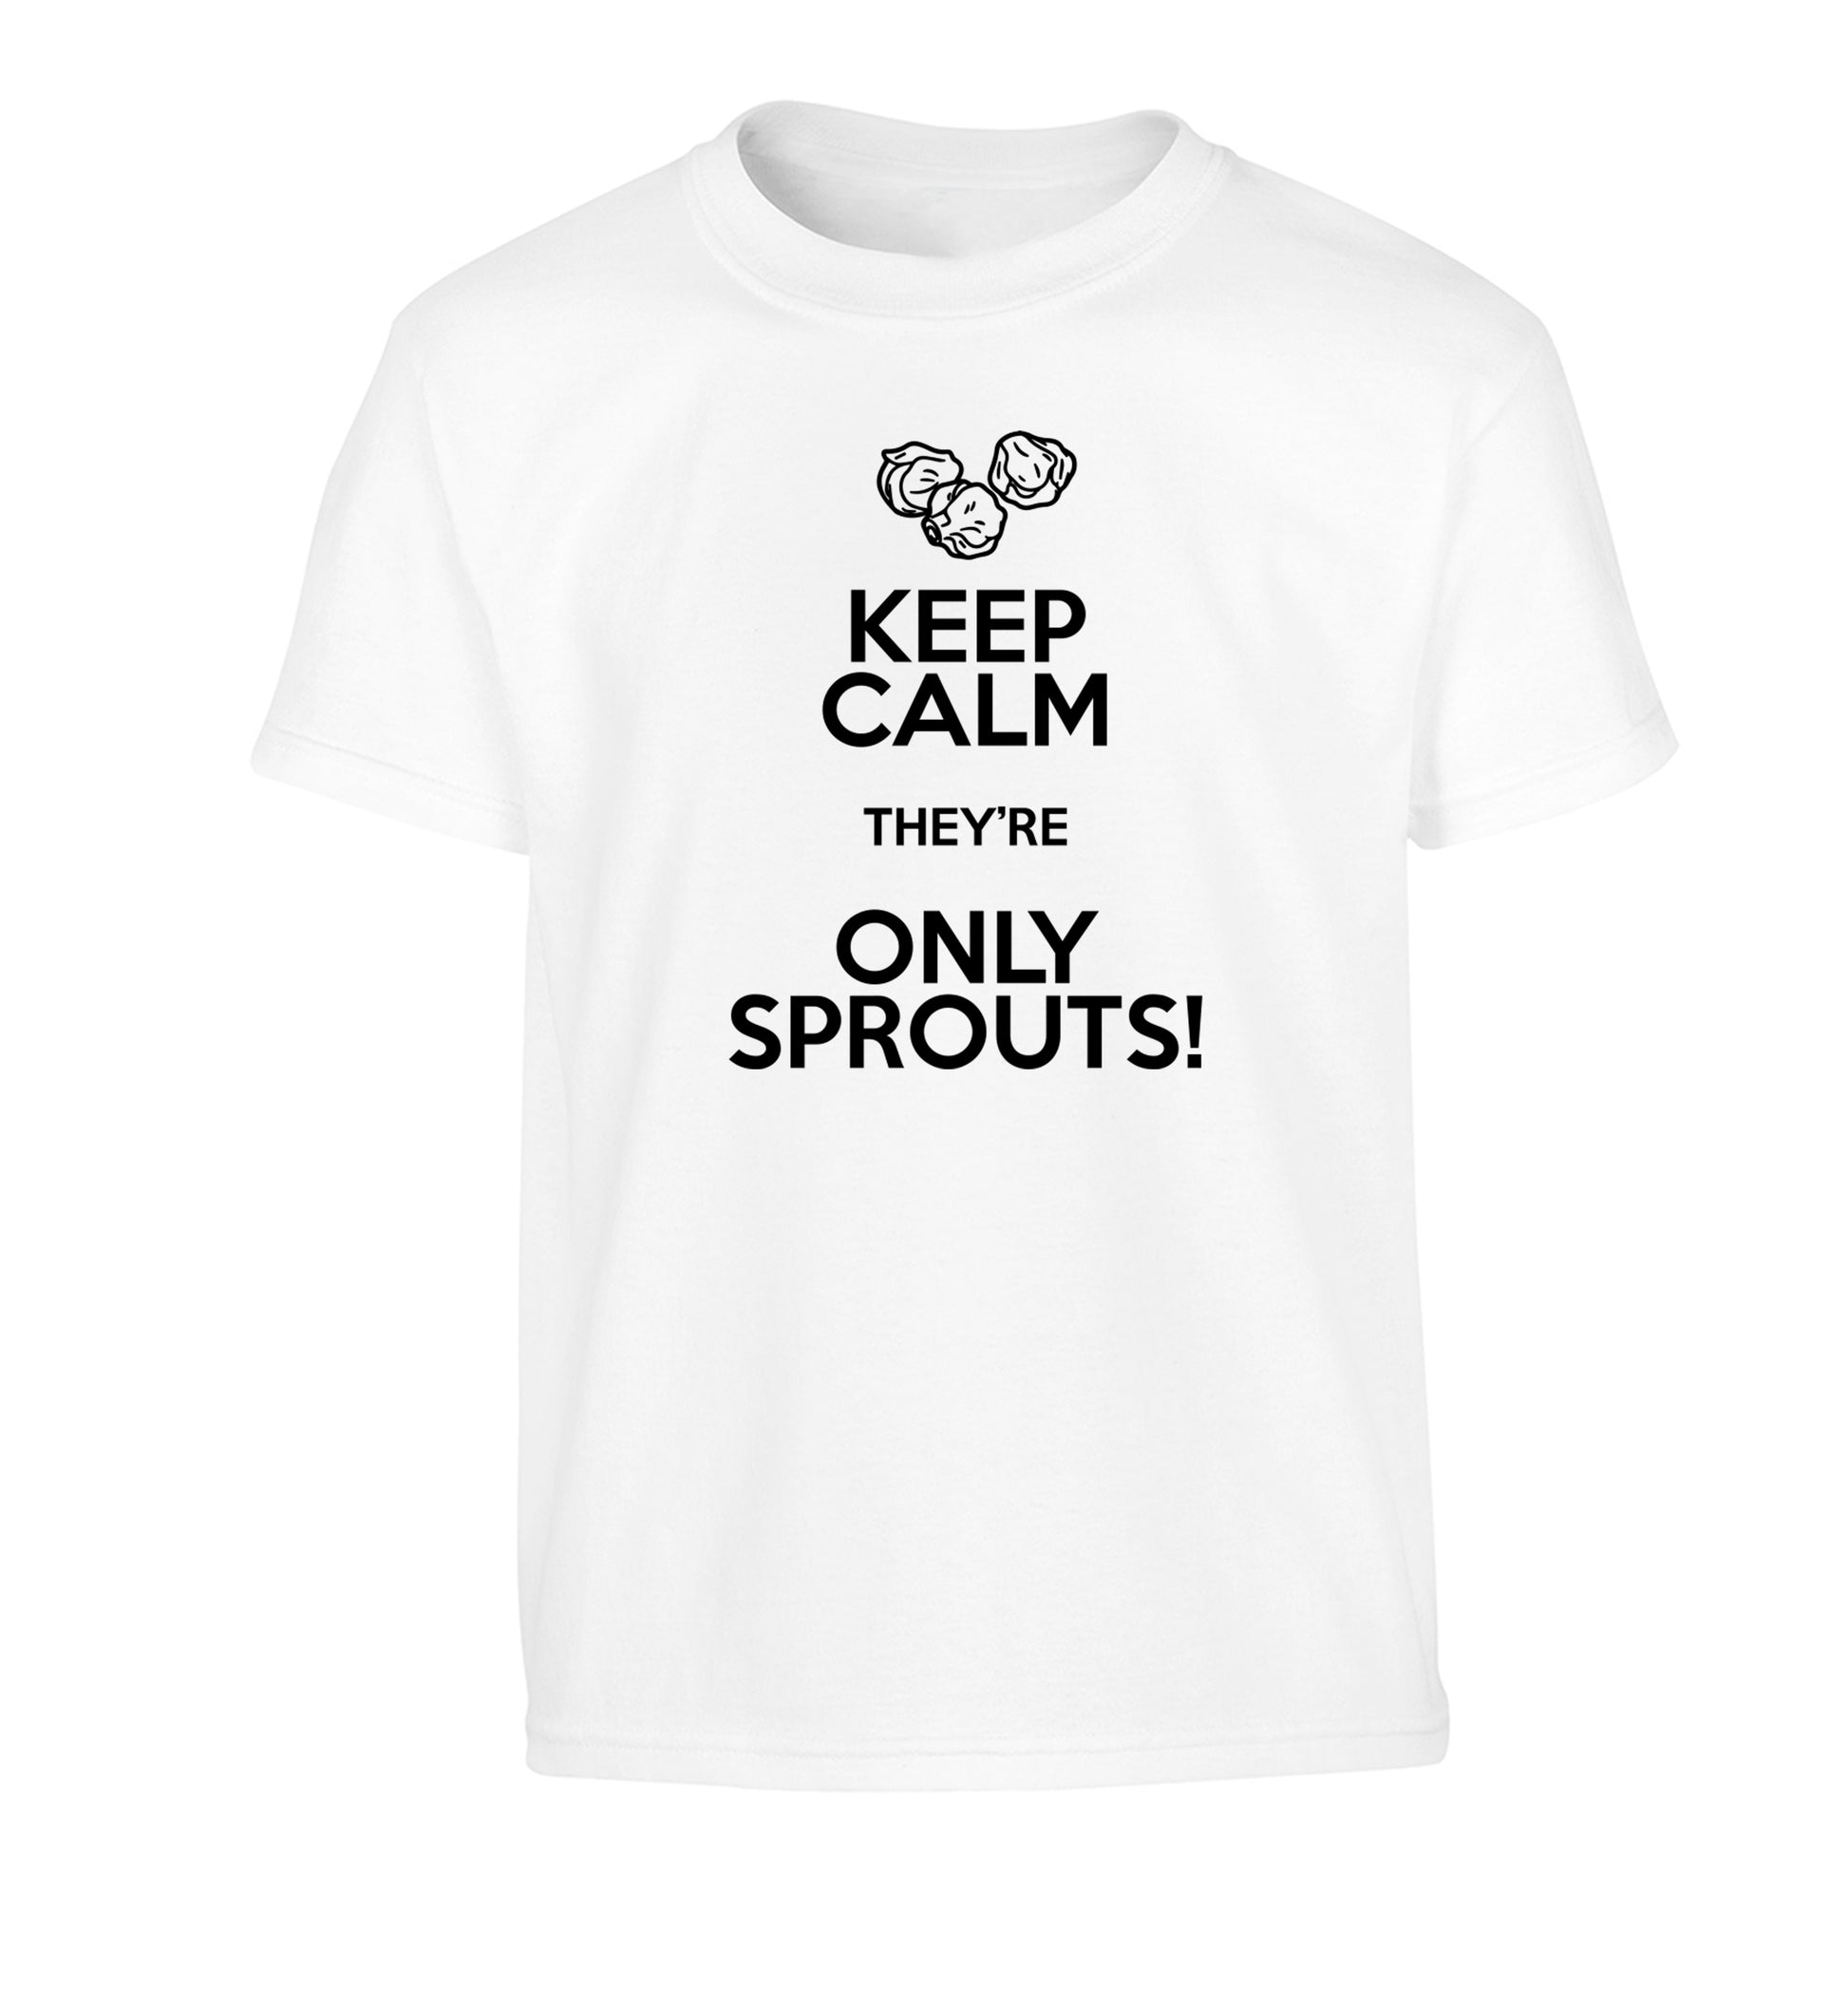 Keep calm they're only sprouts Children's white Tshirt 12-13 Years